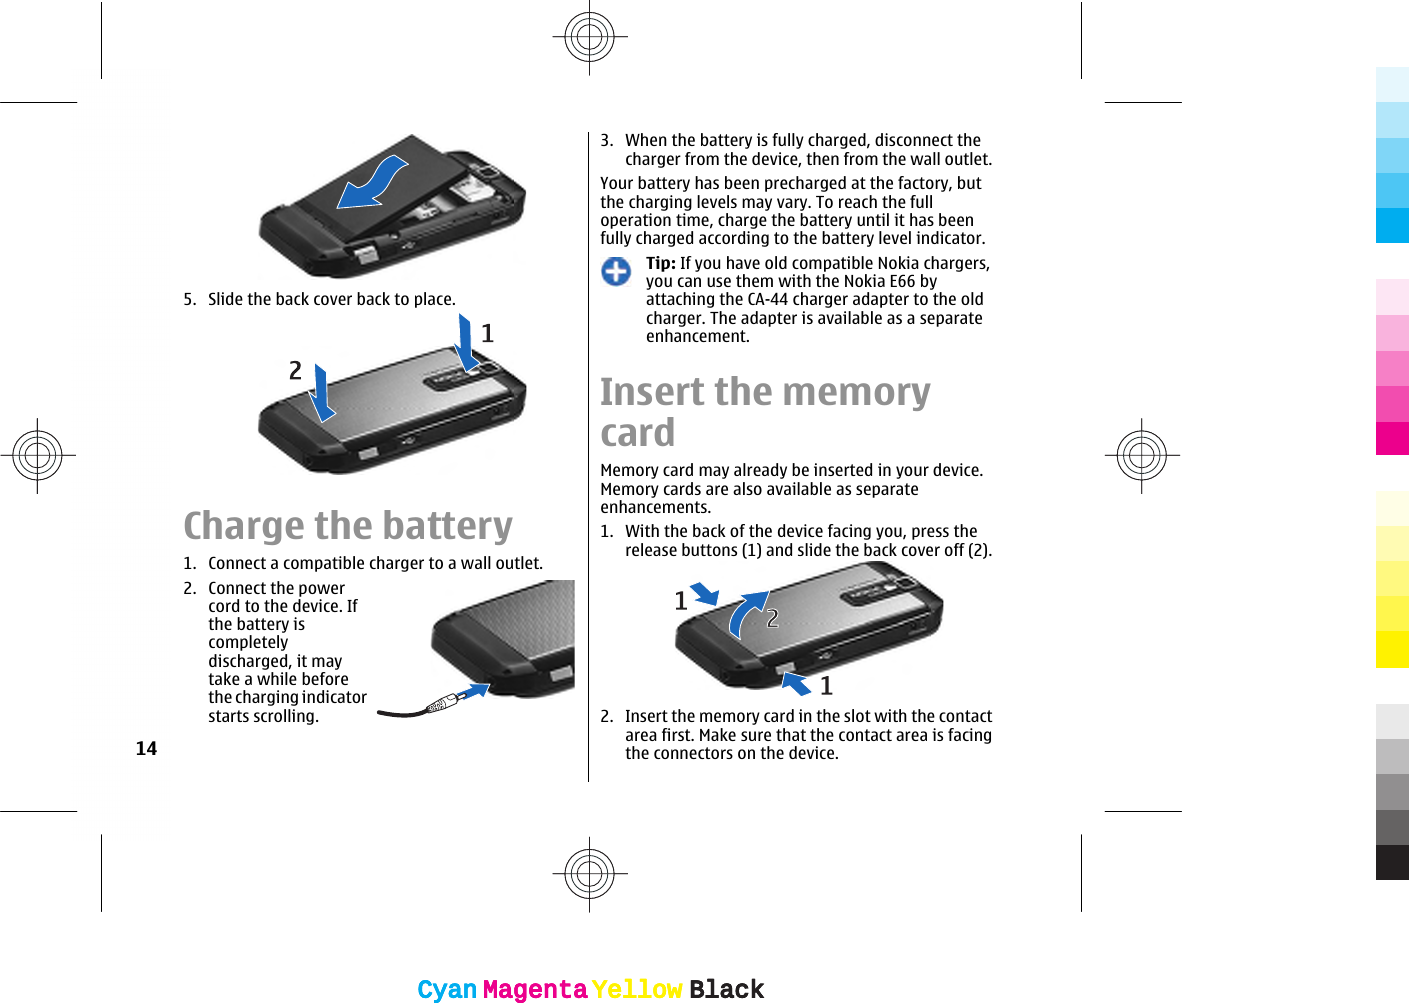 5. Slide the back cover back to place.Charge the battery1. Connect a compatible charger to a wall outlet.2. Connect the powercord to the device. Ifthe battery iscompletelydischarged, it maytake a while beforethe charging indicatorstarts scrolling.3. When the battery is fully charged, disconnect thecharger from the device, then from the wall outlet.Your battery has been precharged at the factory, butthe charging levels may vary. To reach the fulloperation time, charge the battery until it has beenfully charged according to the battery level indicator.Tip: If you have old compatible Nokia chargers,you can use them with the Nokia E66 byattaching the CA-44 charger adapter to the oldcharger. The adapter is available as a separateenhancement.Insert the memorycardMemory card may already be inserted in your device.Memory cards are also available as separateenhancements.1. With the back of the device facing you, press therelease buttons (1) and slide the back cover off (2).2. Insert the memory card in the slot with the contactarea first. Make sure that the contact area is facingthe connectors on the device.14CyanCyanMagentaMagentaYellowYellowBlackBlackCyanCyanMagentaMagentaYellowYellowBlackBlack